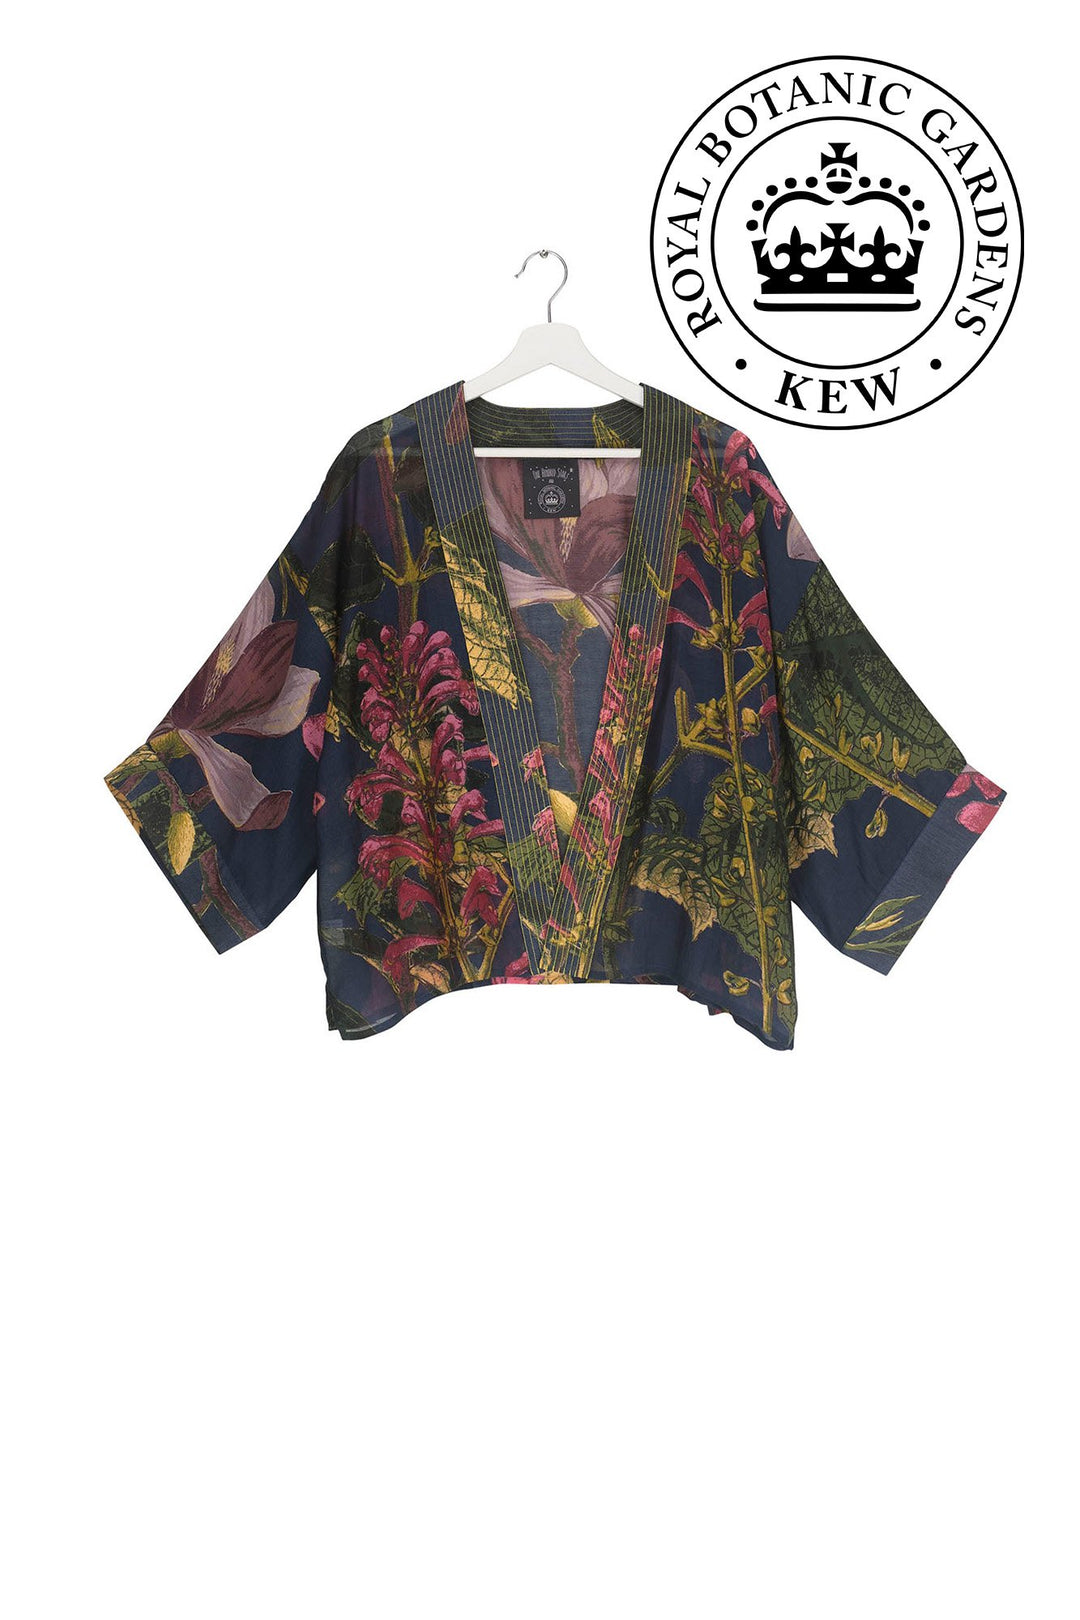 KEW Magnolia Blue Kimono- Our bestselling kimono jackets have loose ¾ length sleeves, an open front and a lightly embroidered lapel. Pair with a matching camisole and your favourite jeans in summer or layer over a polo neck during the cooler months.